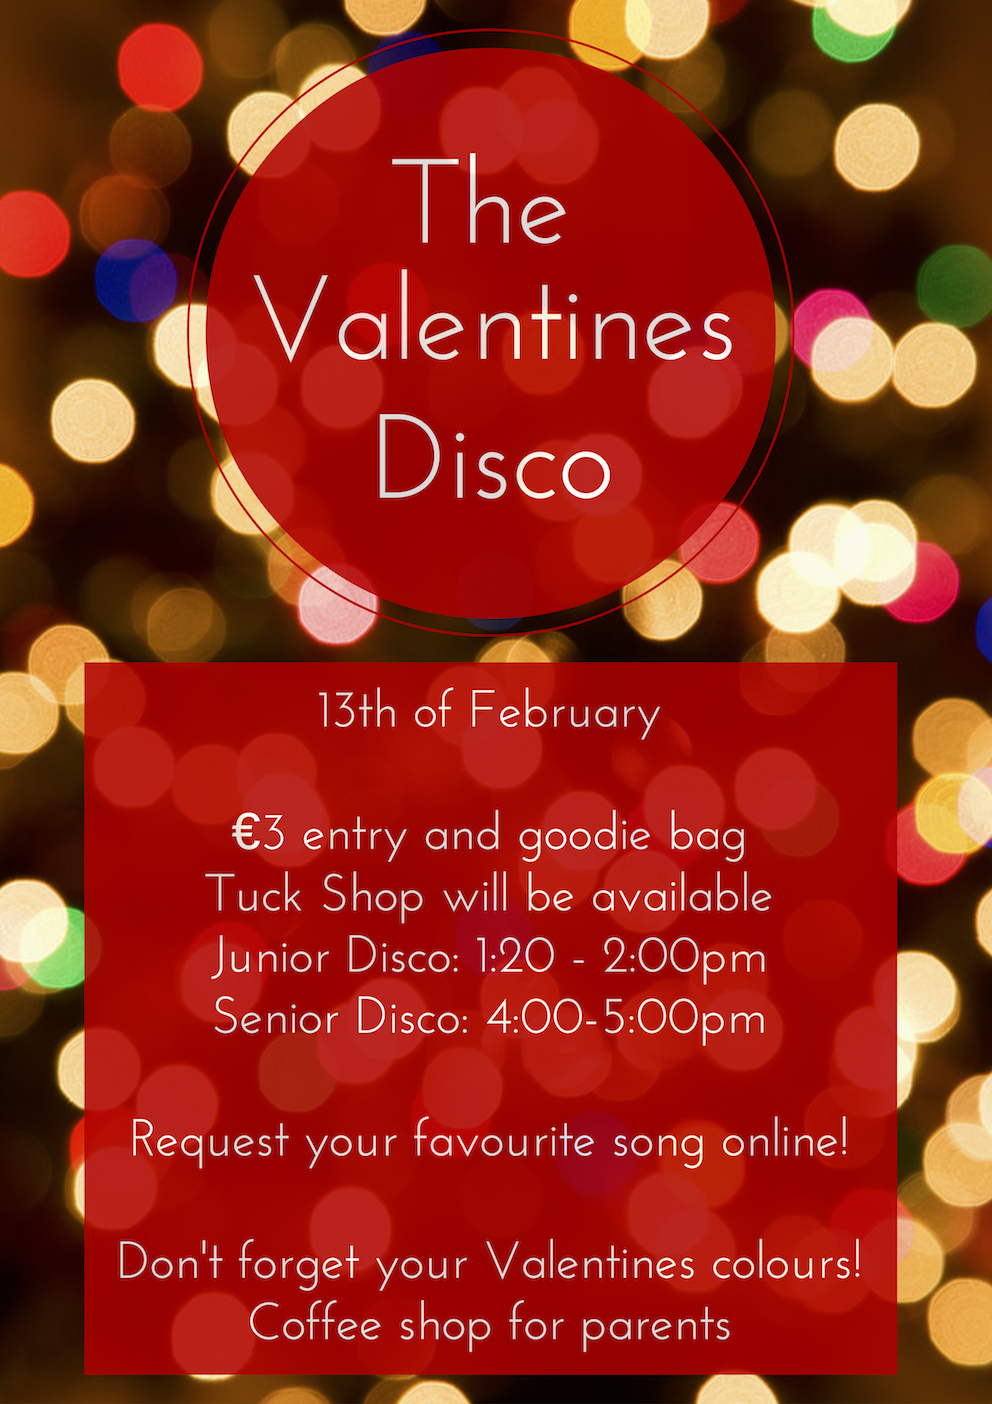 Valentines Disco Friday the 13th of February